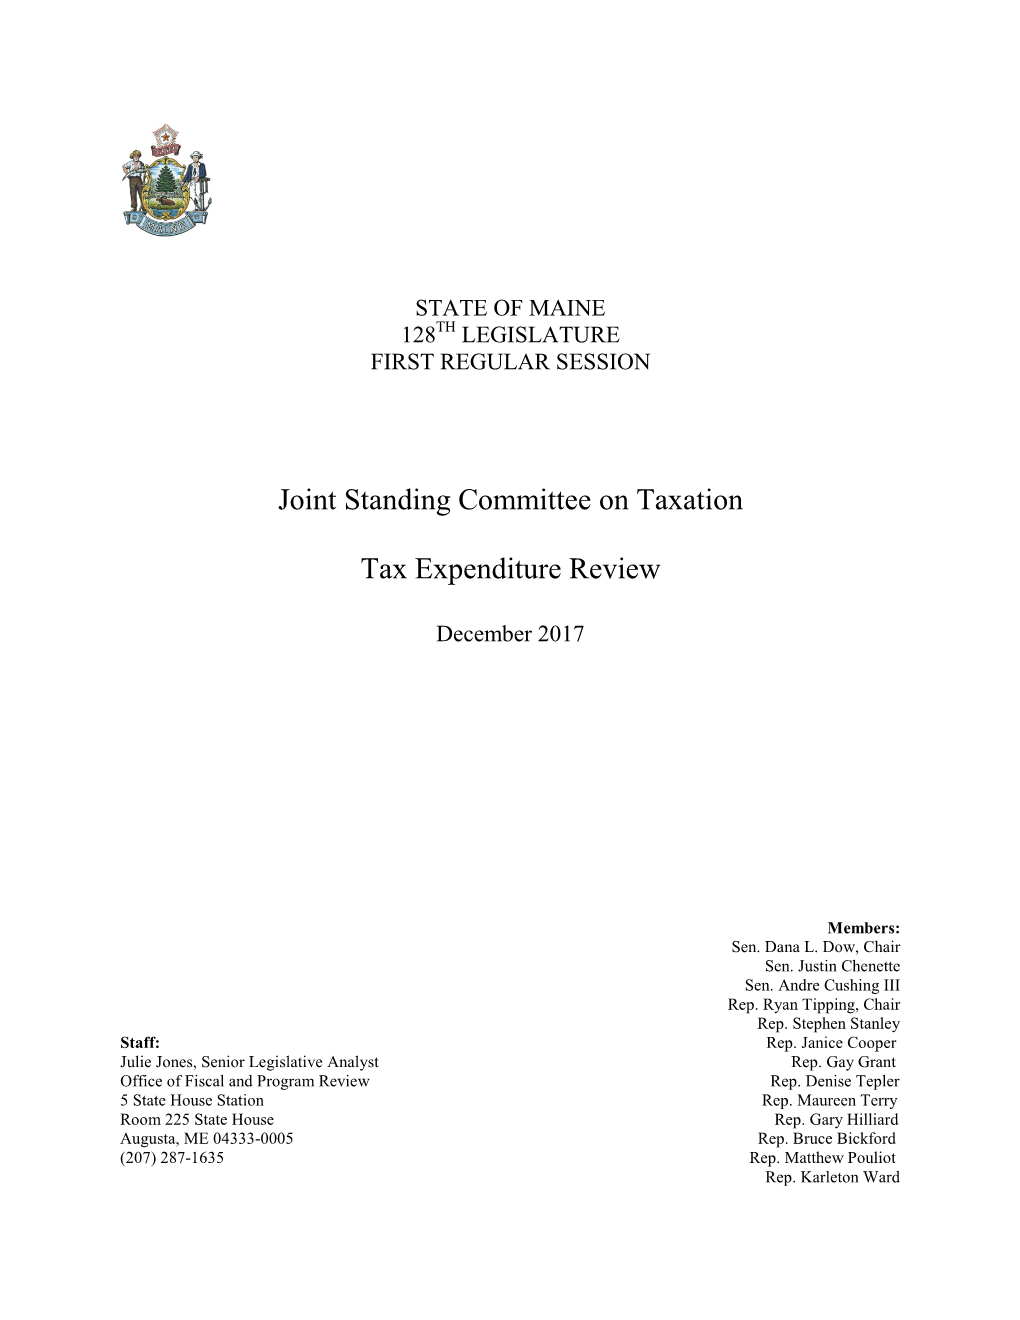 Taxation Committee's 2017 Report on Tax Expenditure Review